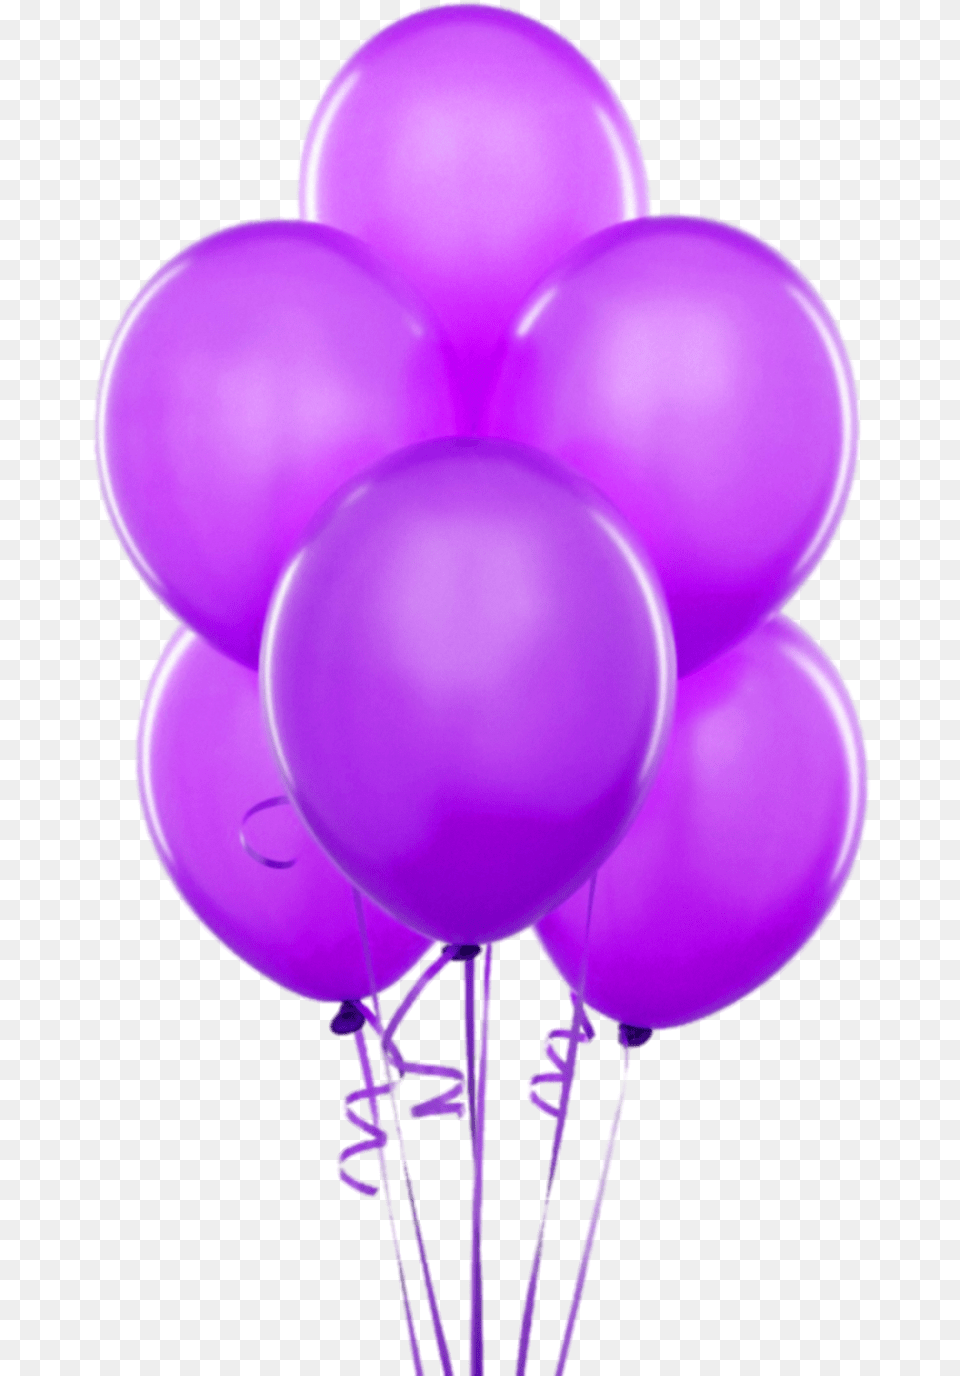 Download Purple Transparent Balloons Clipart Birthday Gold Balloons Clear Background, Balloon Png Image